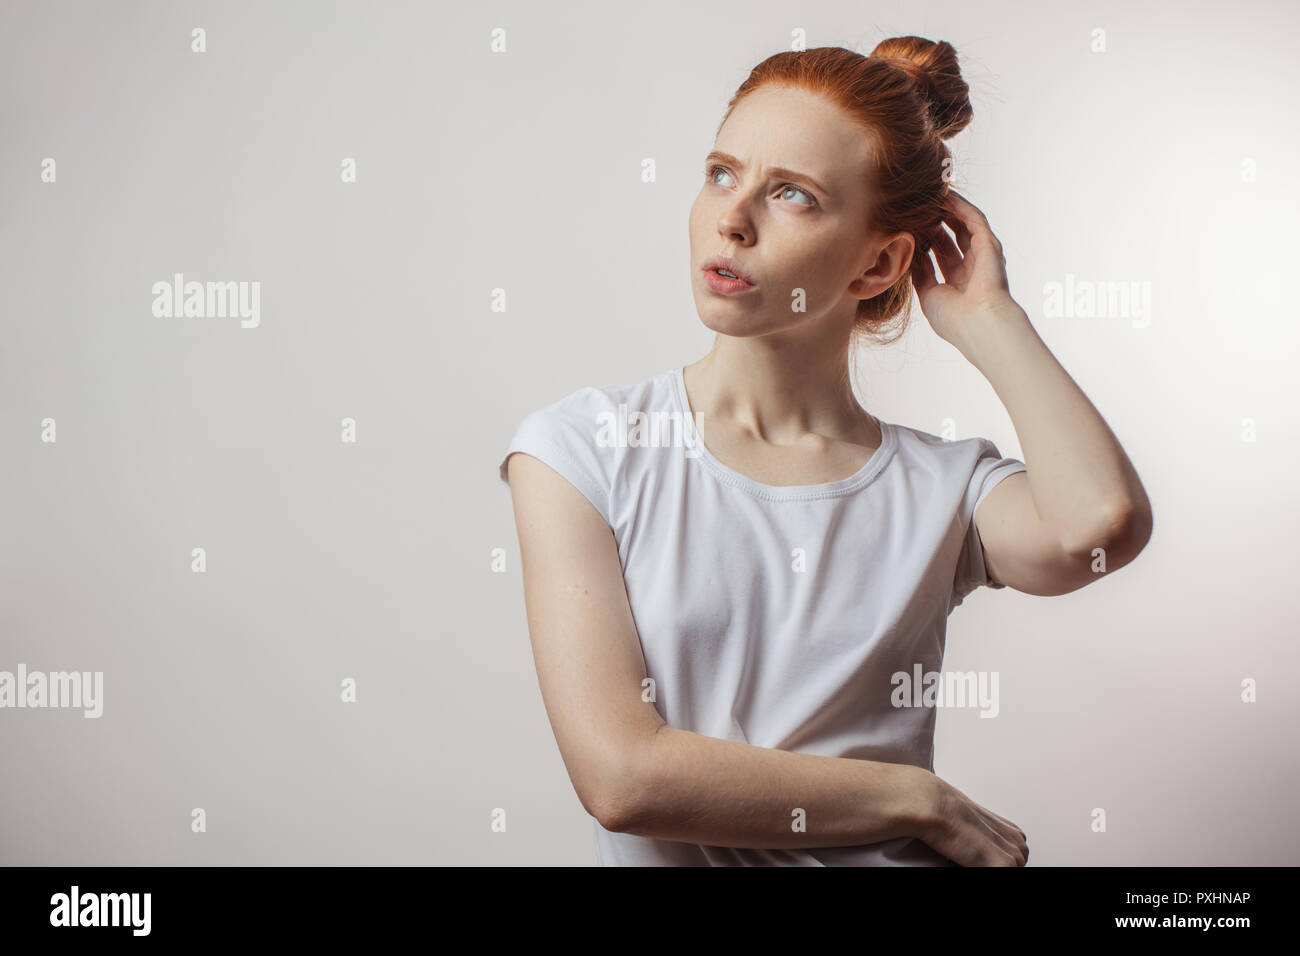 Redhaired woman with pensive expression isolé sur fond blanc. Banque D'Images